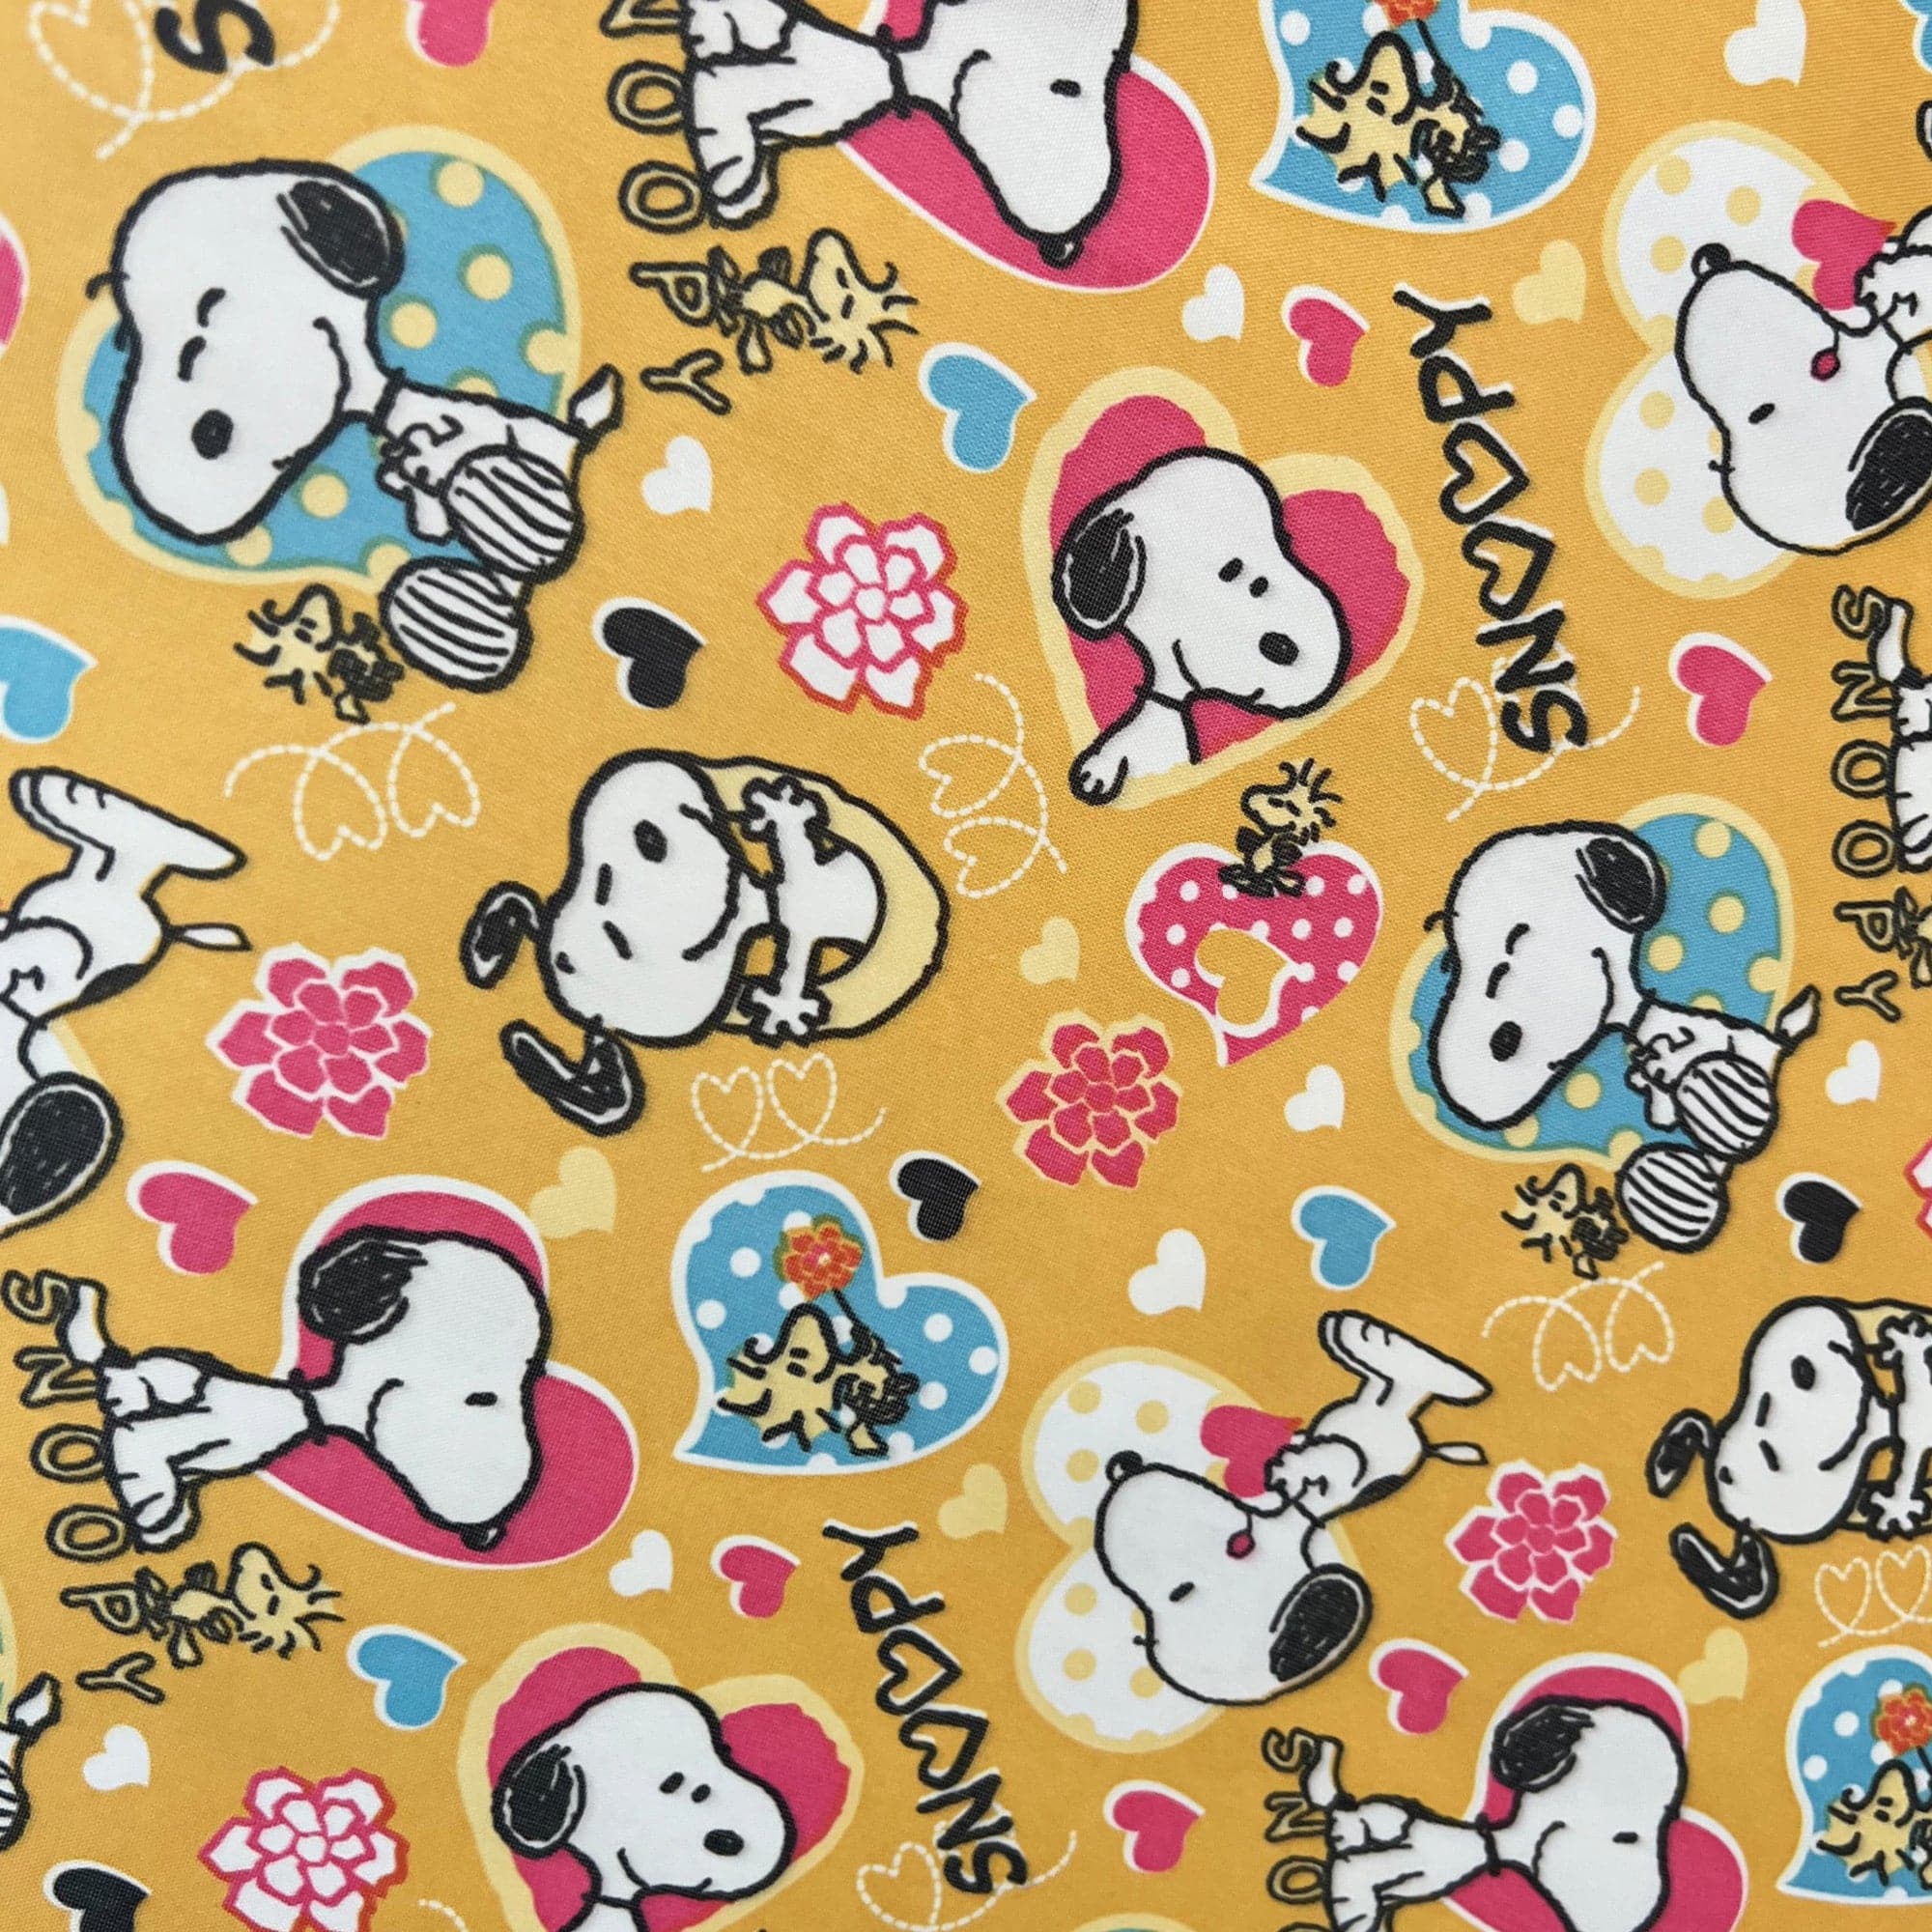 Gabri - Barber Hairdressing Kids Hair Cutting Capes & Gowns Snoopy Pattern (Yellow)